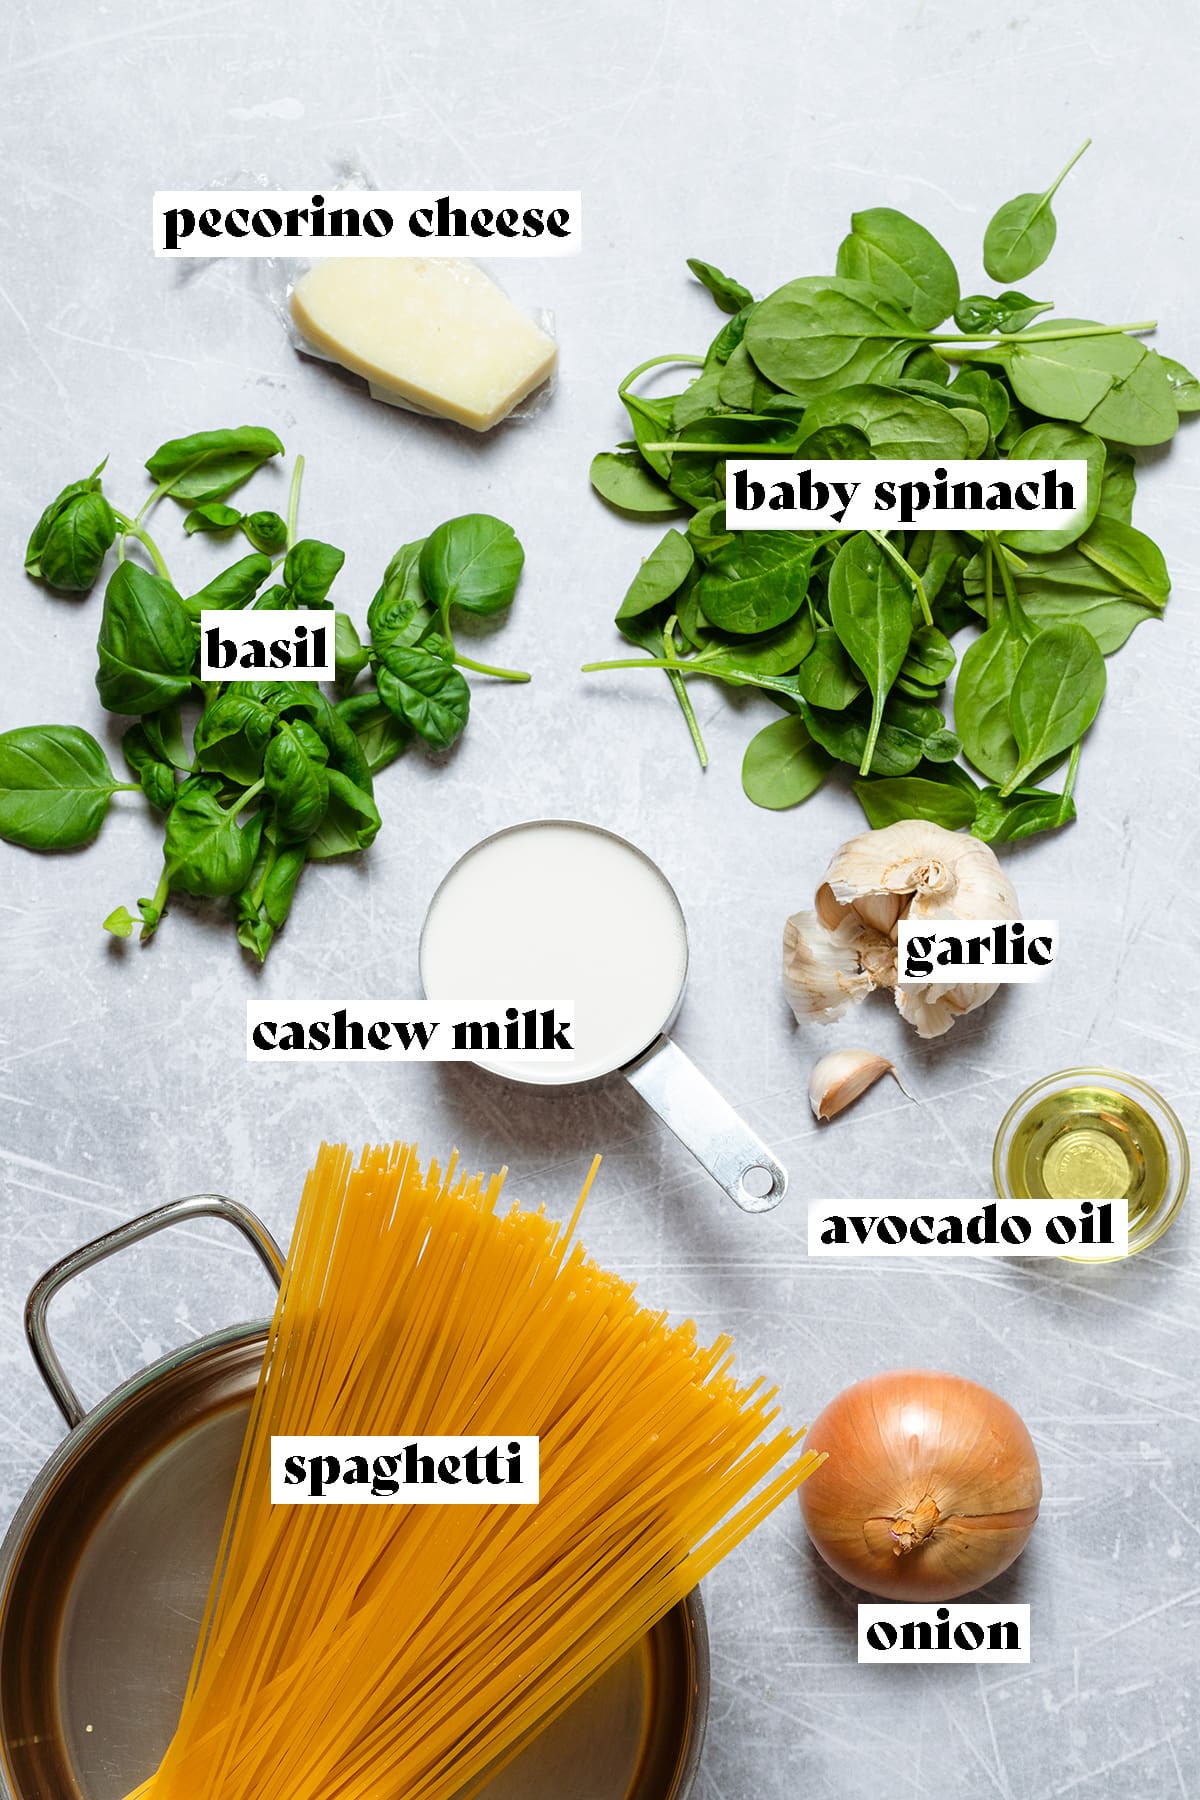 Spinach, basil, spaghetti, parmesan, garlic, and onion laid out on a metal background.